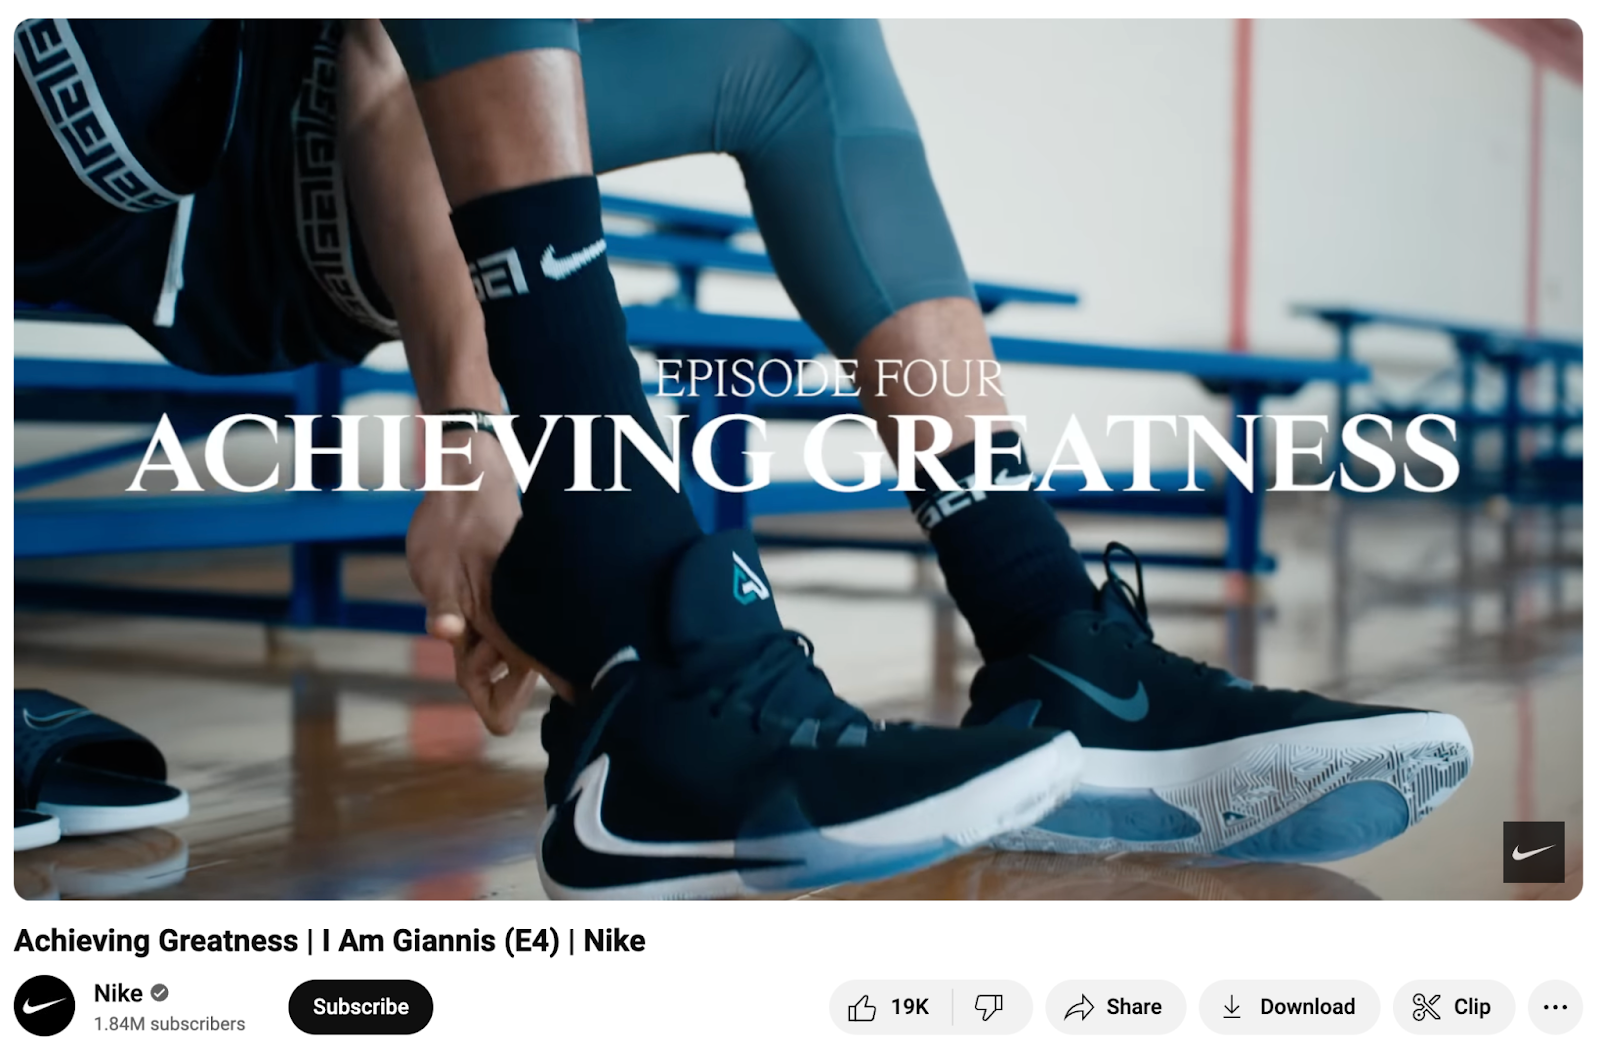 Nike's YouTube video titled "Achieving Greatness"